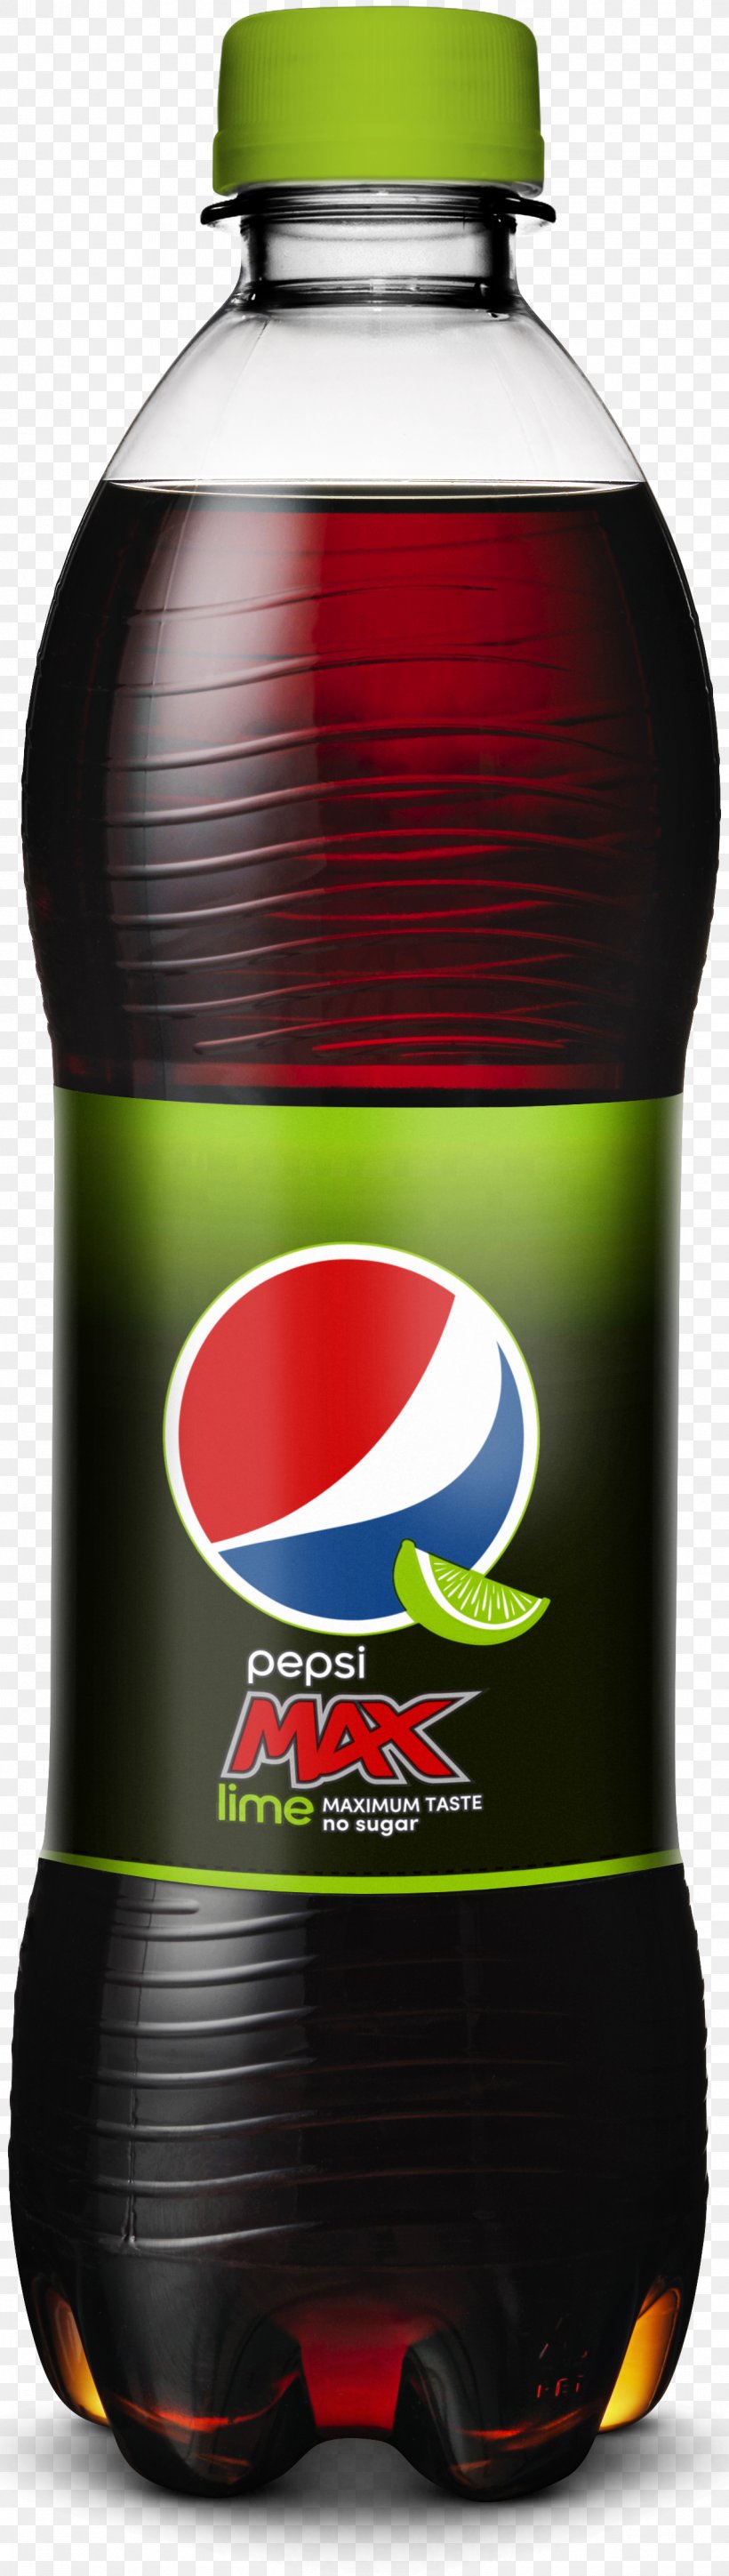 Pepsi Max Fizzy Drinks Lemon-lime Drink Iced Tea, PNG, 1274x4502px, 7 Up, Pepsi Max, Bottle, Drink, Fizzy Drinks Download Free